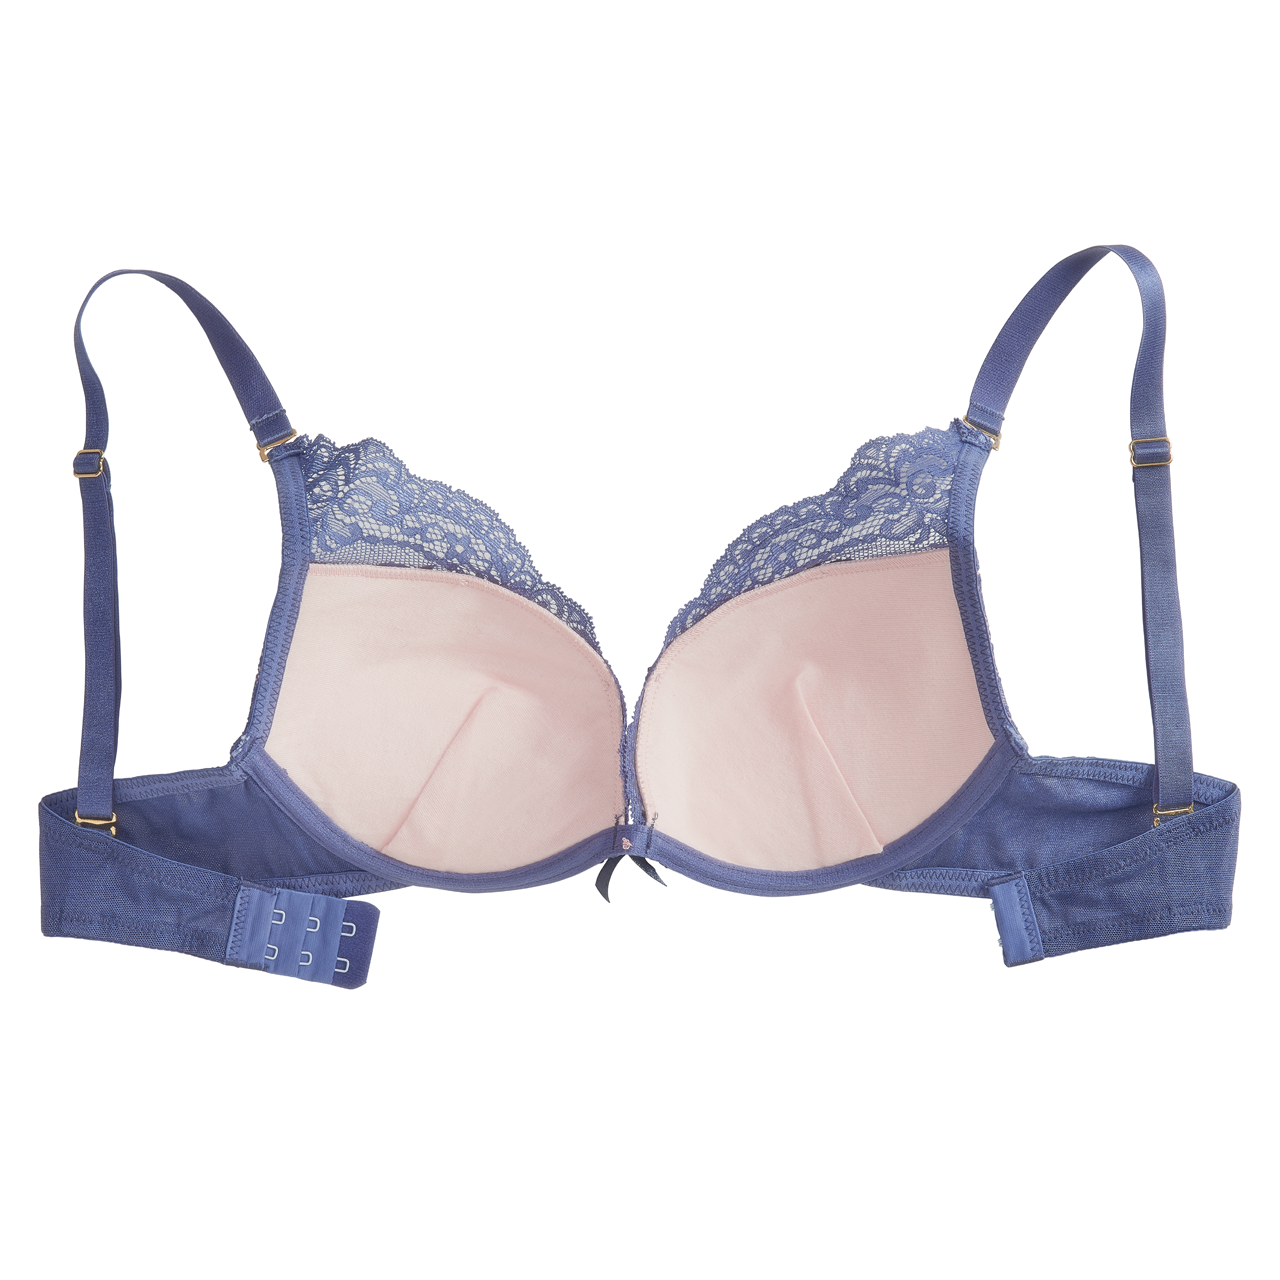 The Little Bra Company Lucia Lace Plunge Push-Up Bra (552026505281)